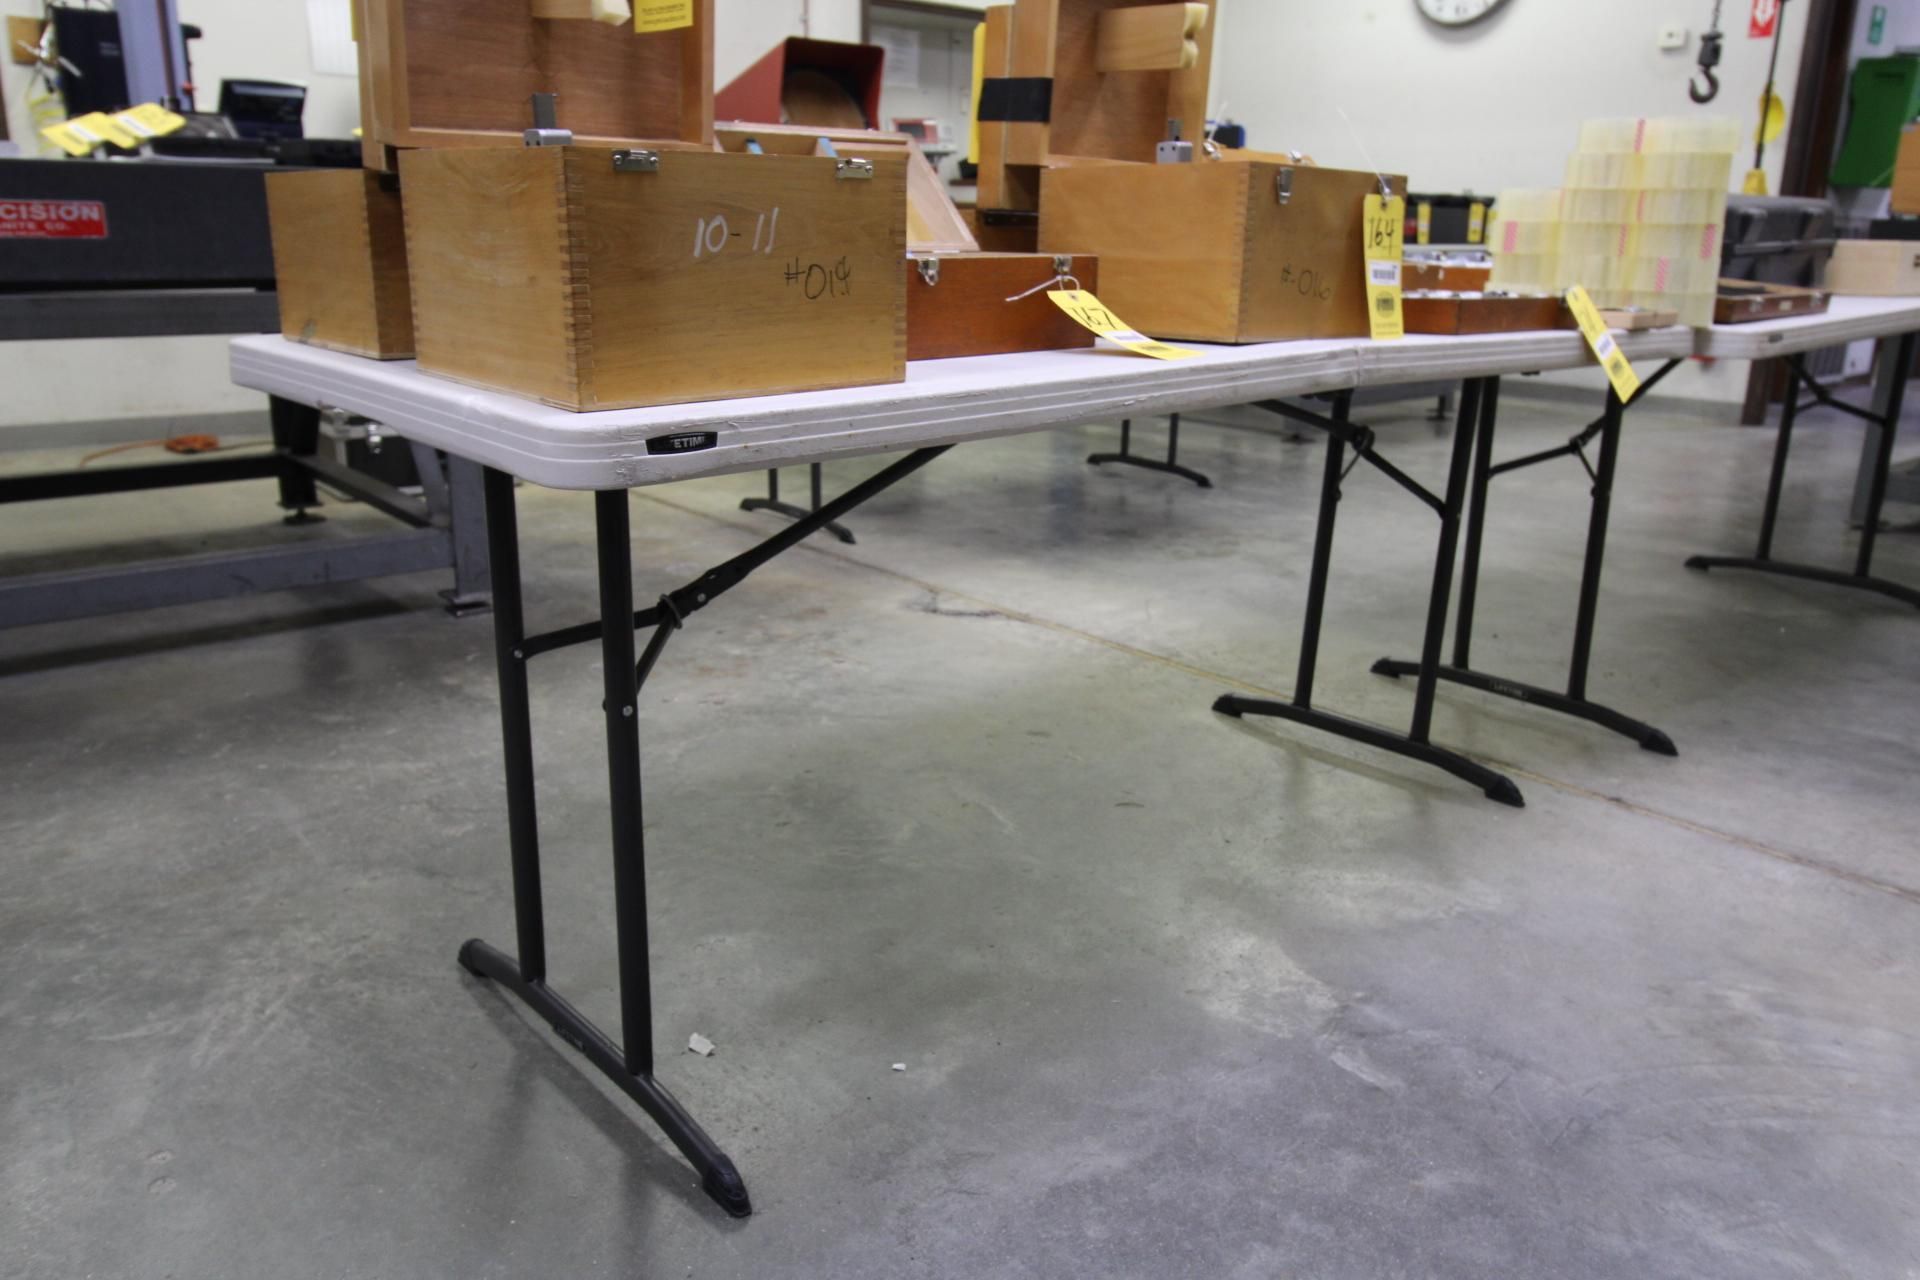 LOT OF LIFETIME CENTER FOLDING TABLES (3), 30"W. x 72"L. (Note: two week delayed removal) - Image 5 of 5